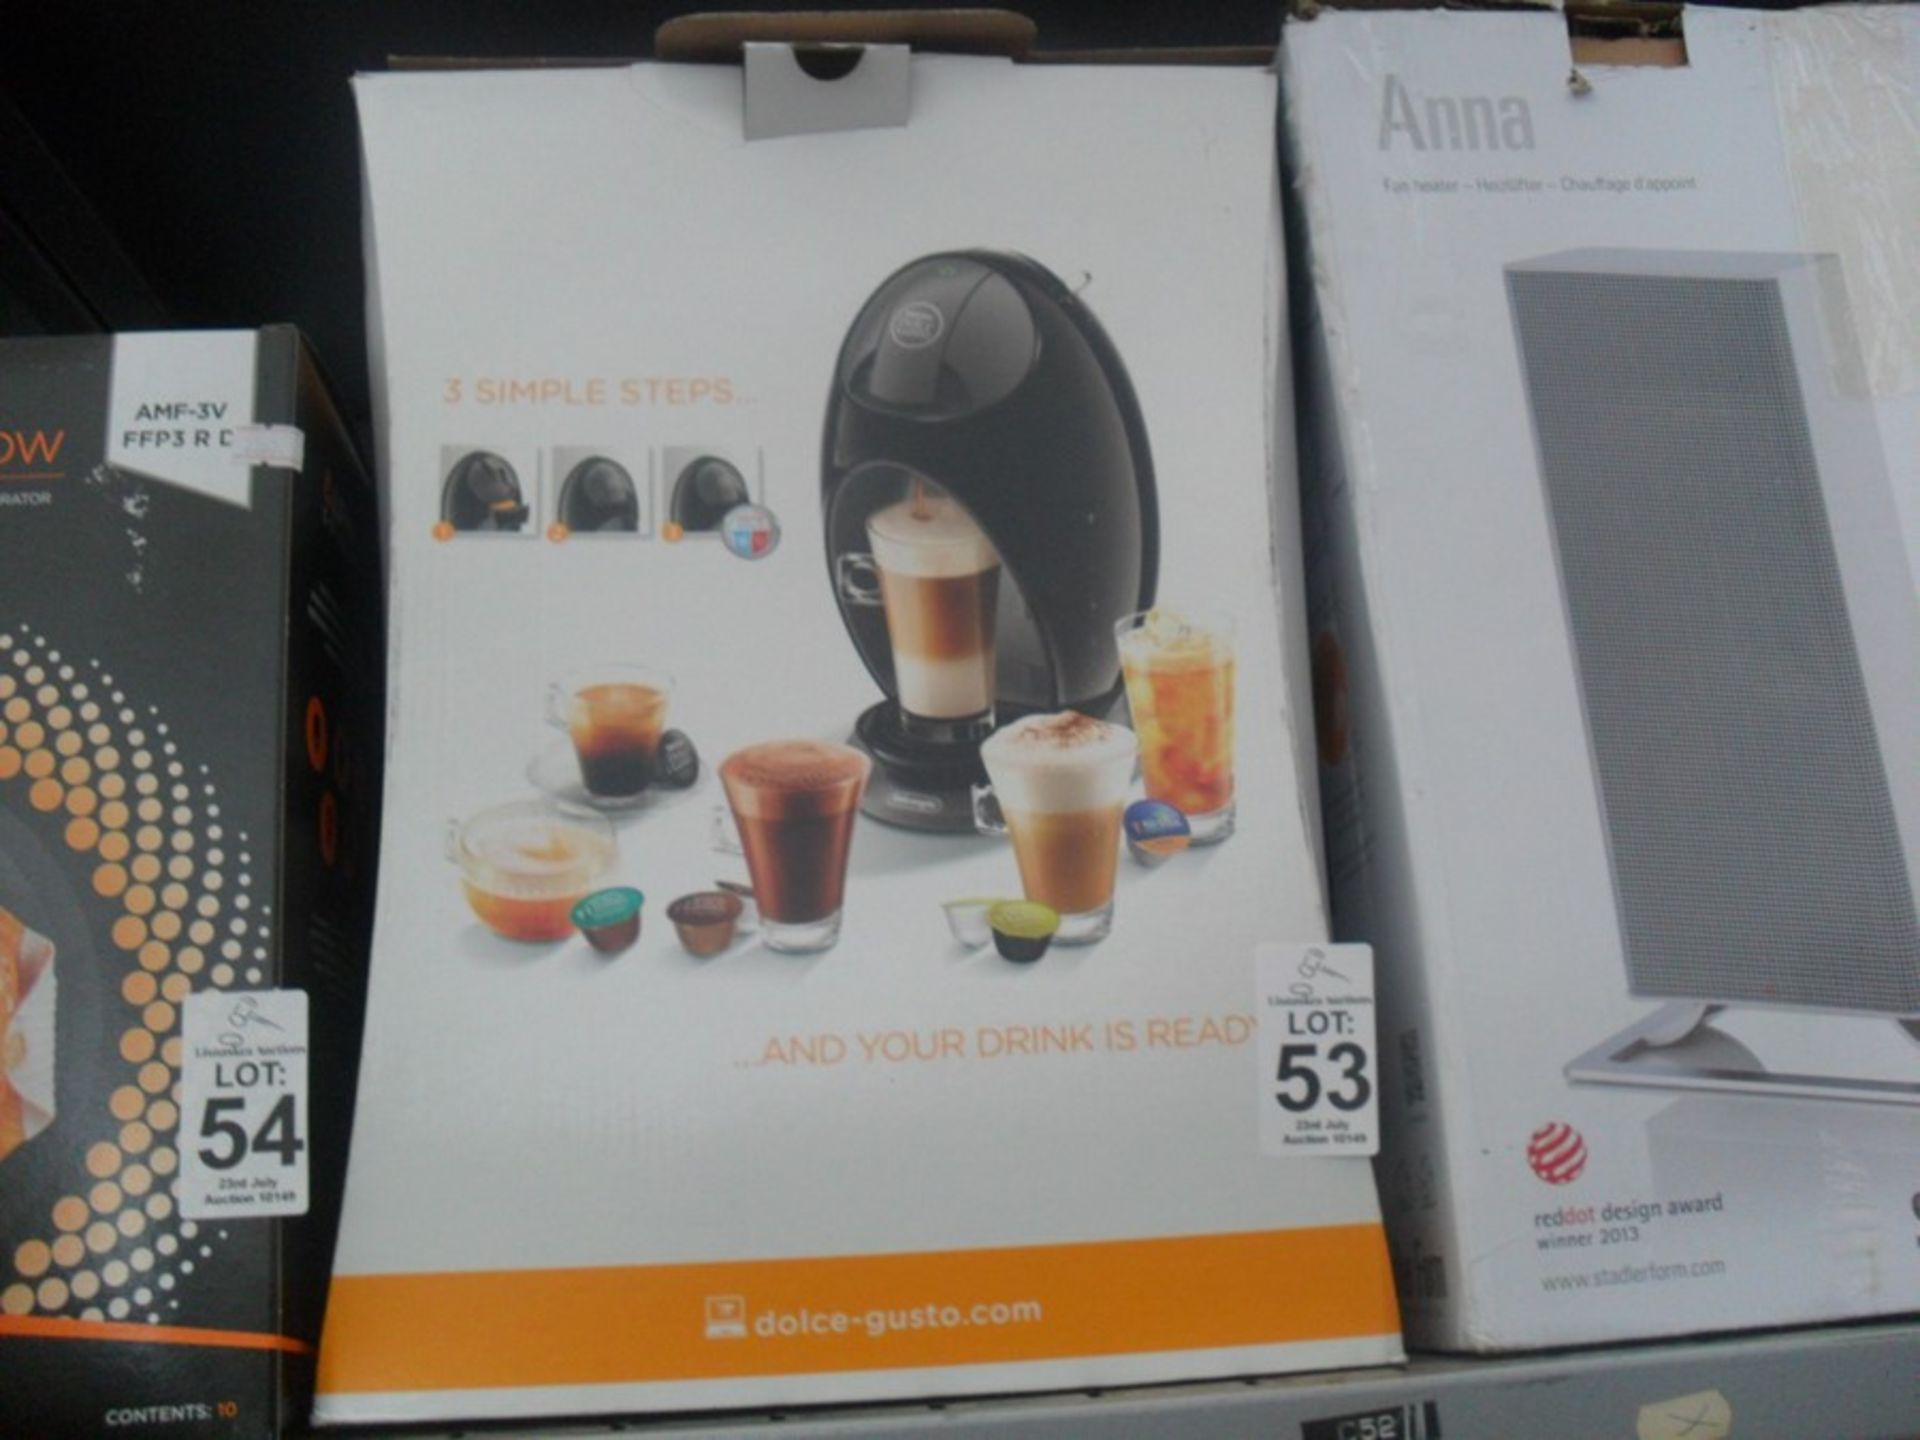 BOXED DOLCE GUSTO COFFEE MAKER